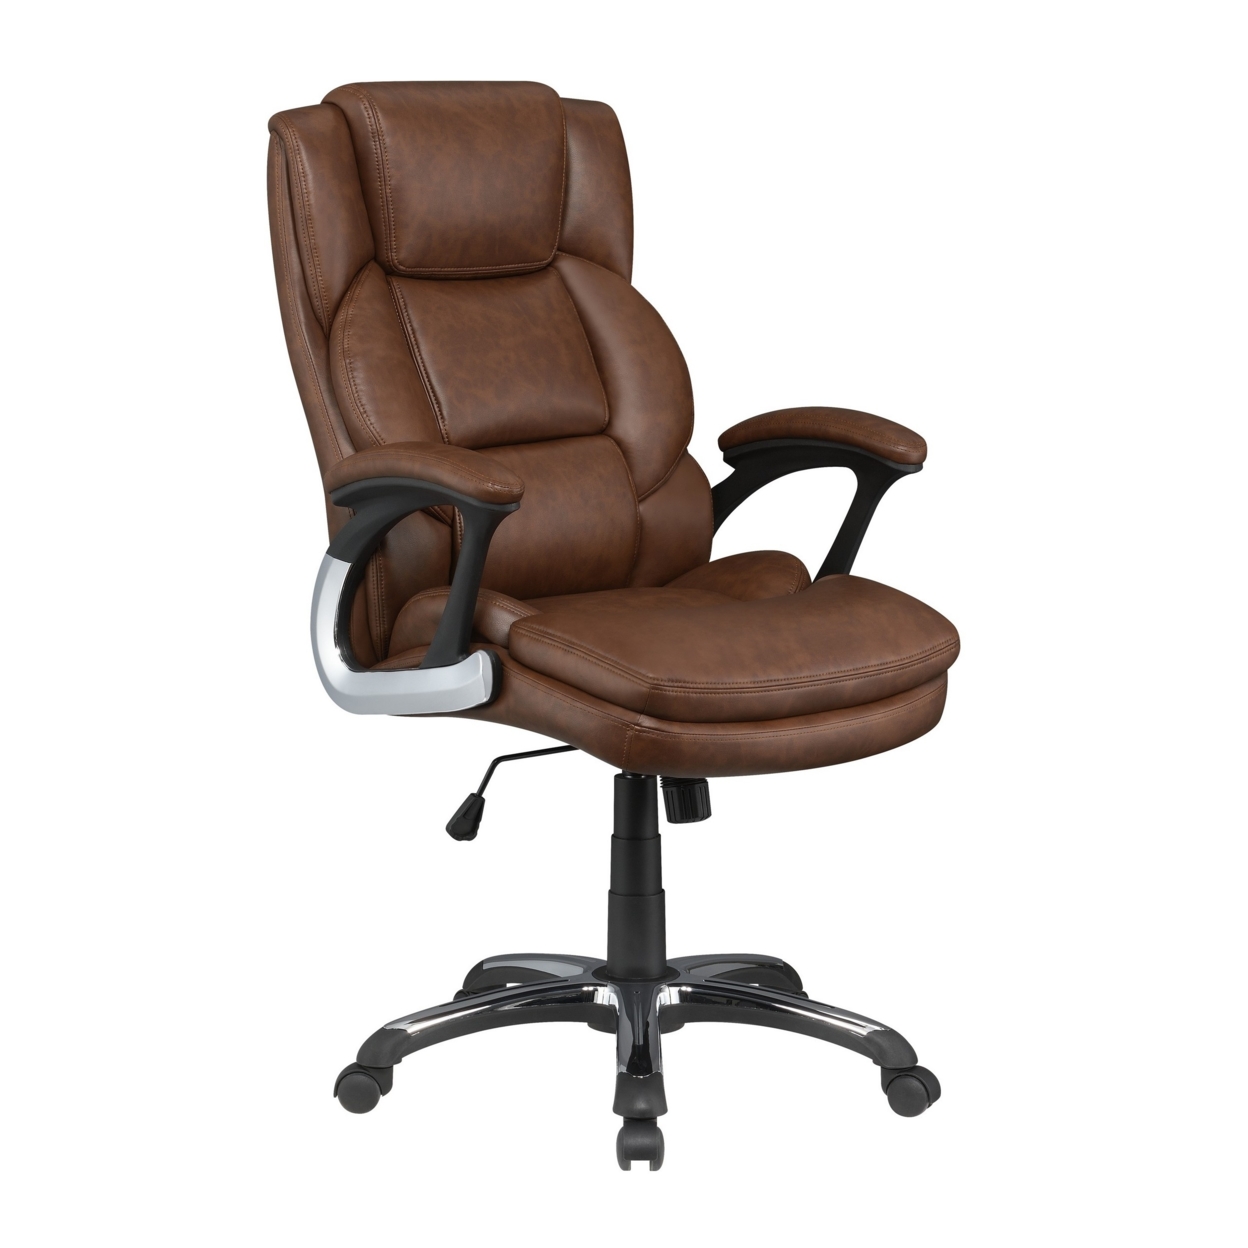 Leatherette Office Chair With Cushioned Back And Metal Star Base, Brown- Saltoro Sherpi